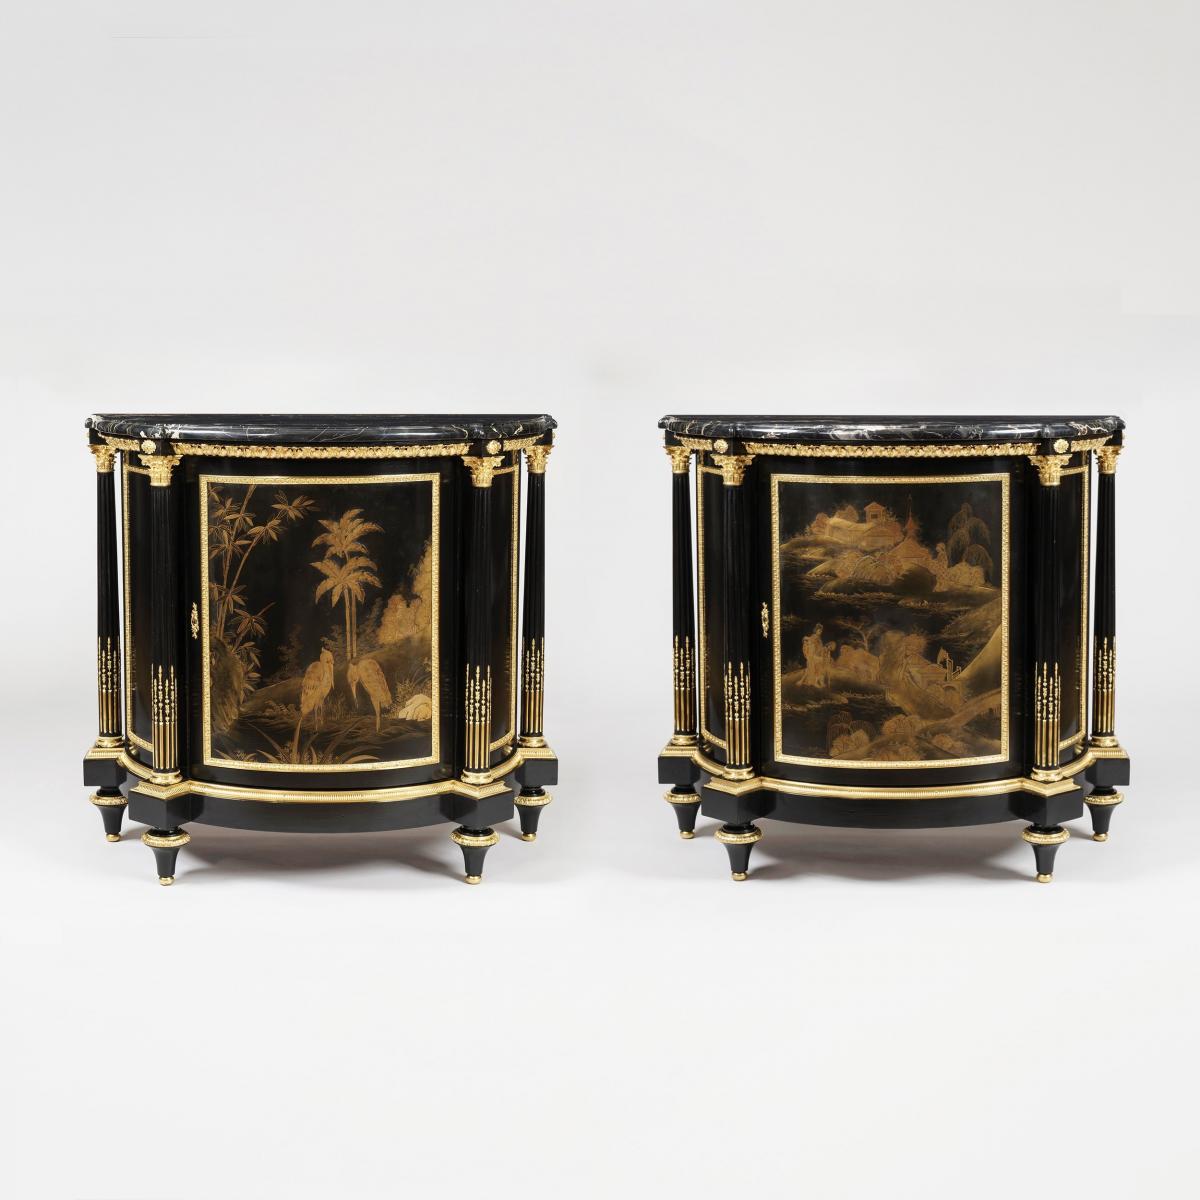 A Pair of Cabinets in the Louis XVI Manner By Maison Millet